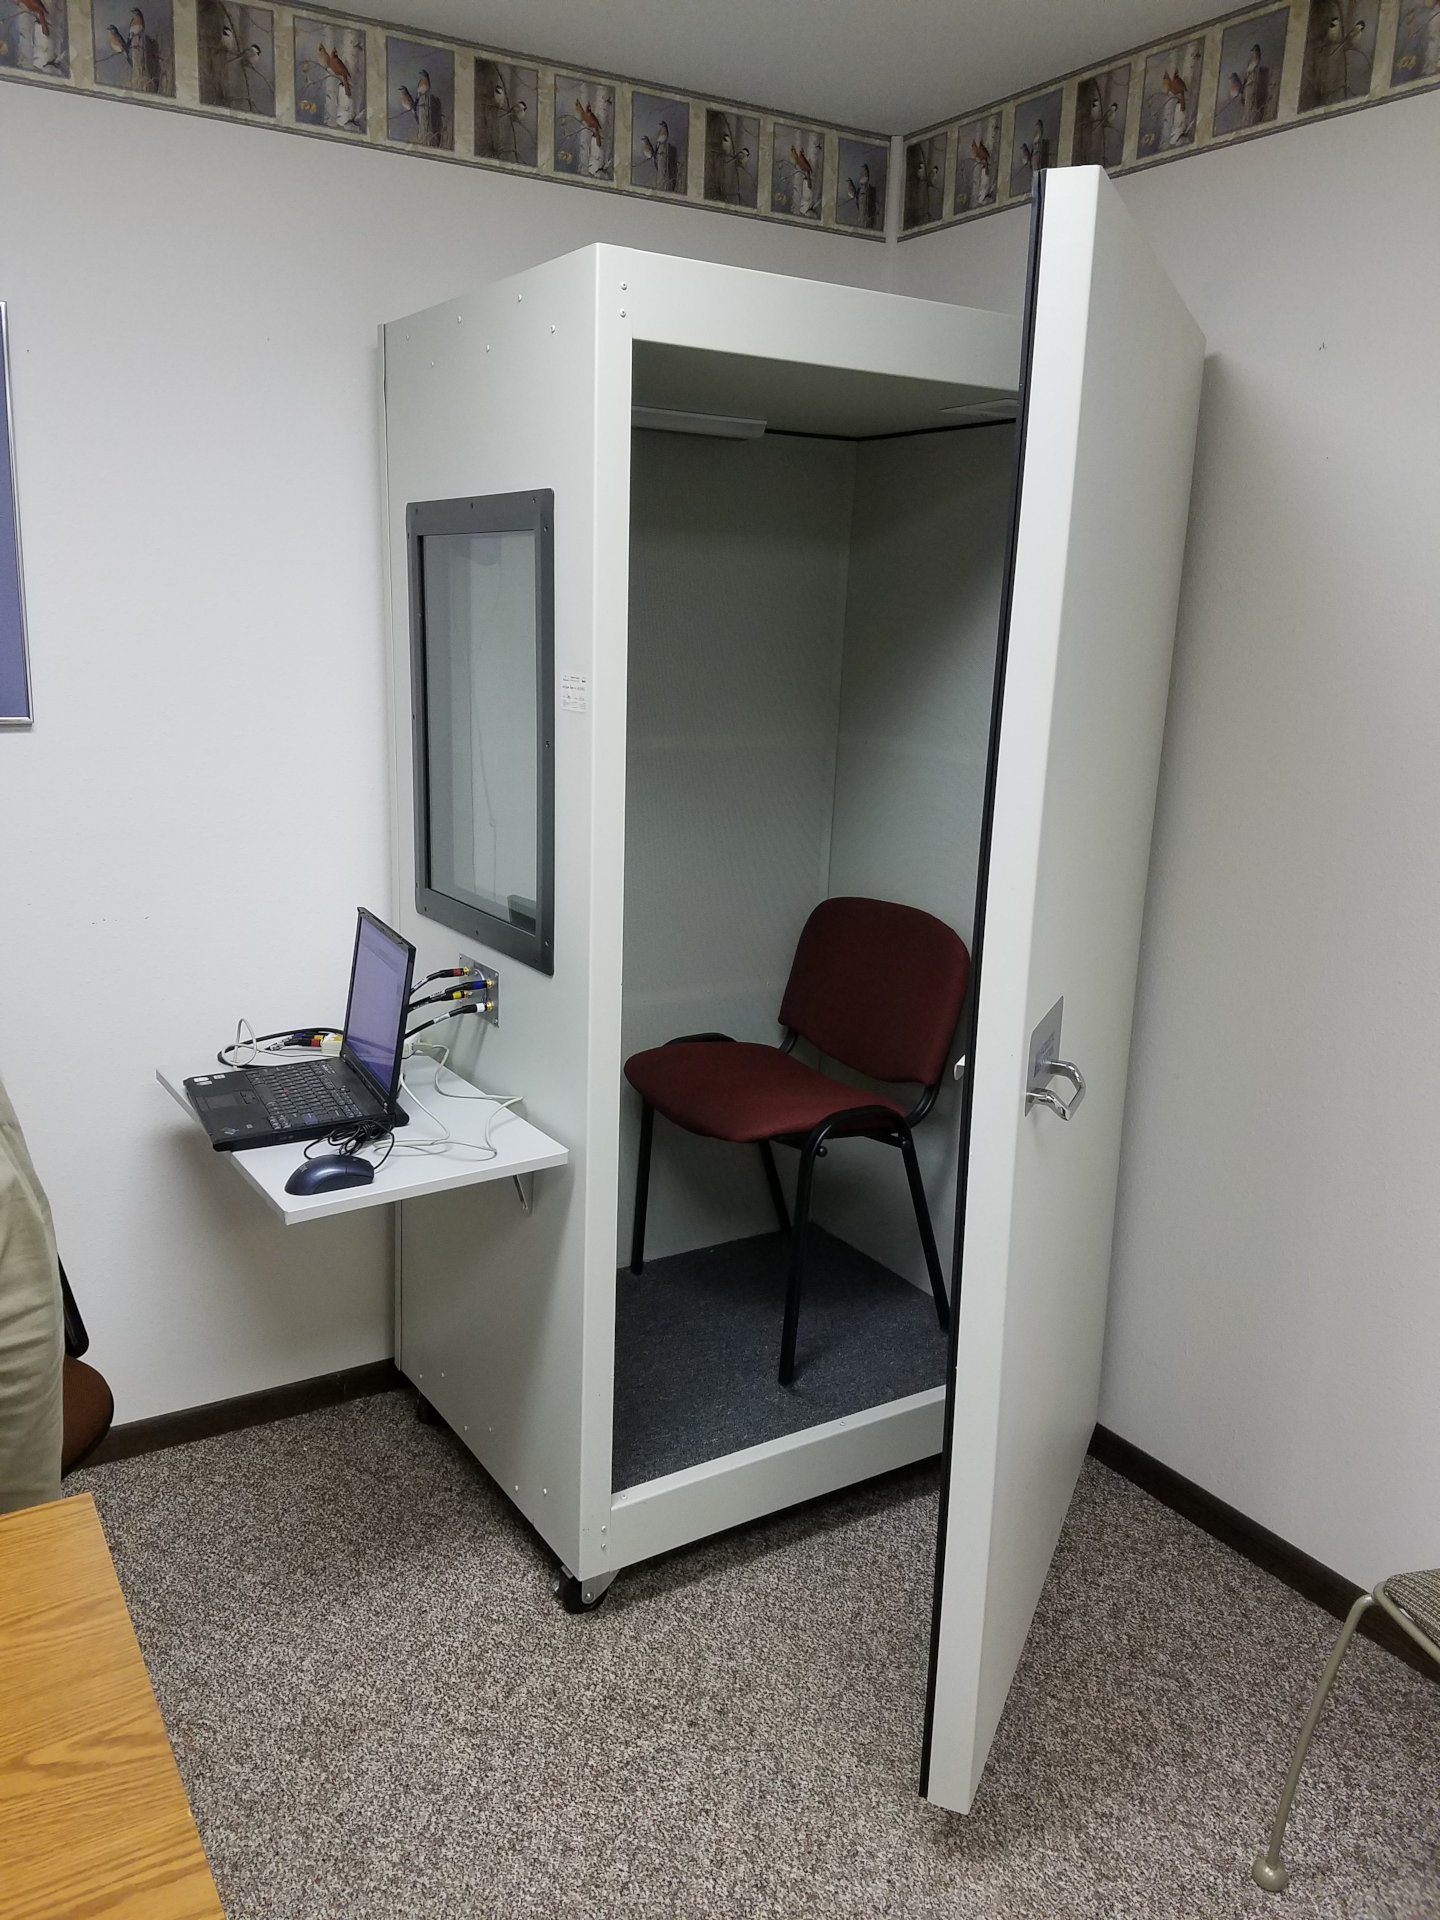 hearing test booth with door ajar and laptop hooked up outside